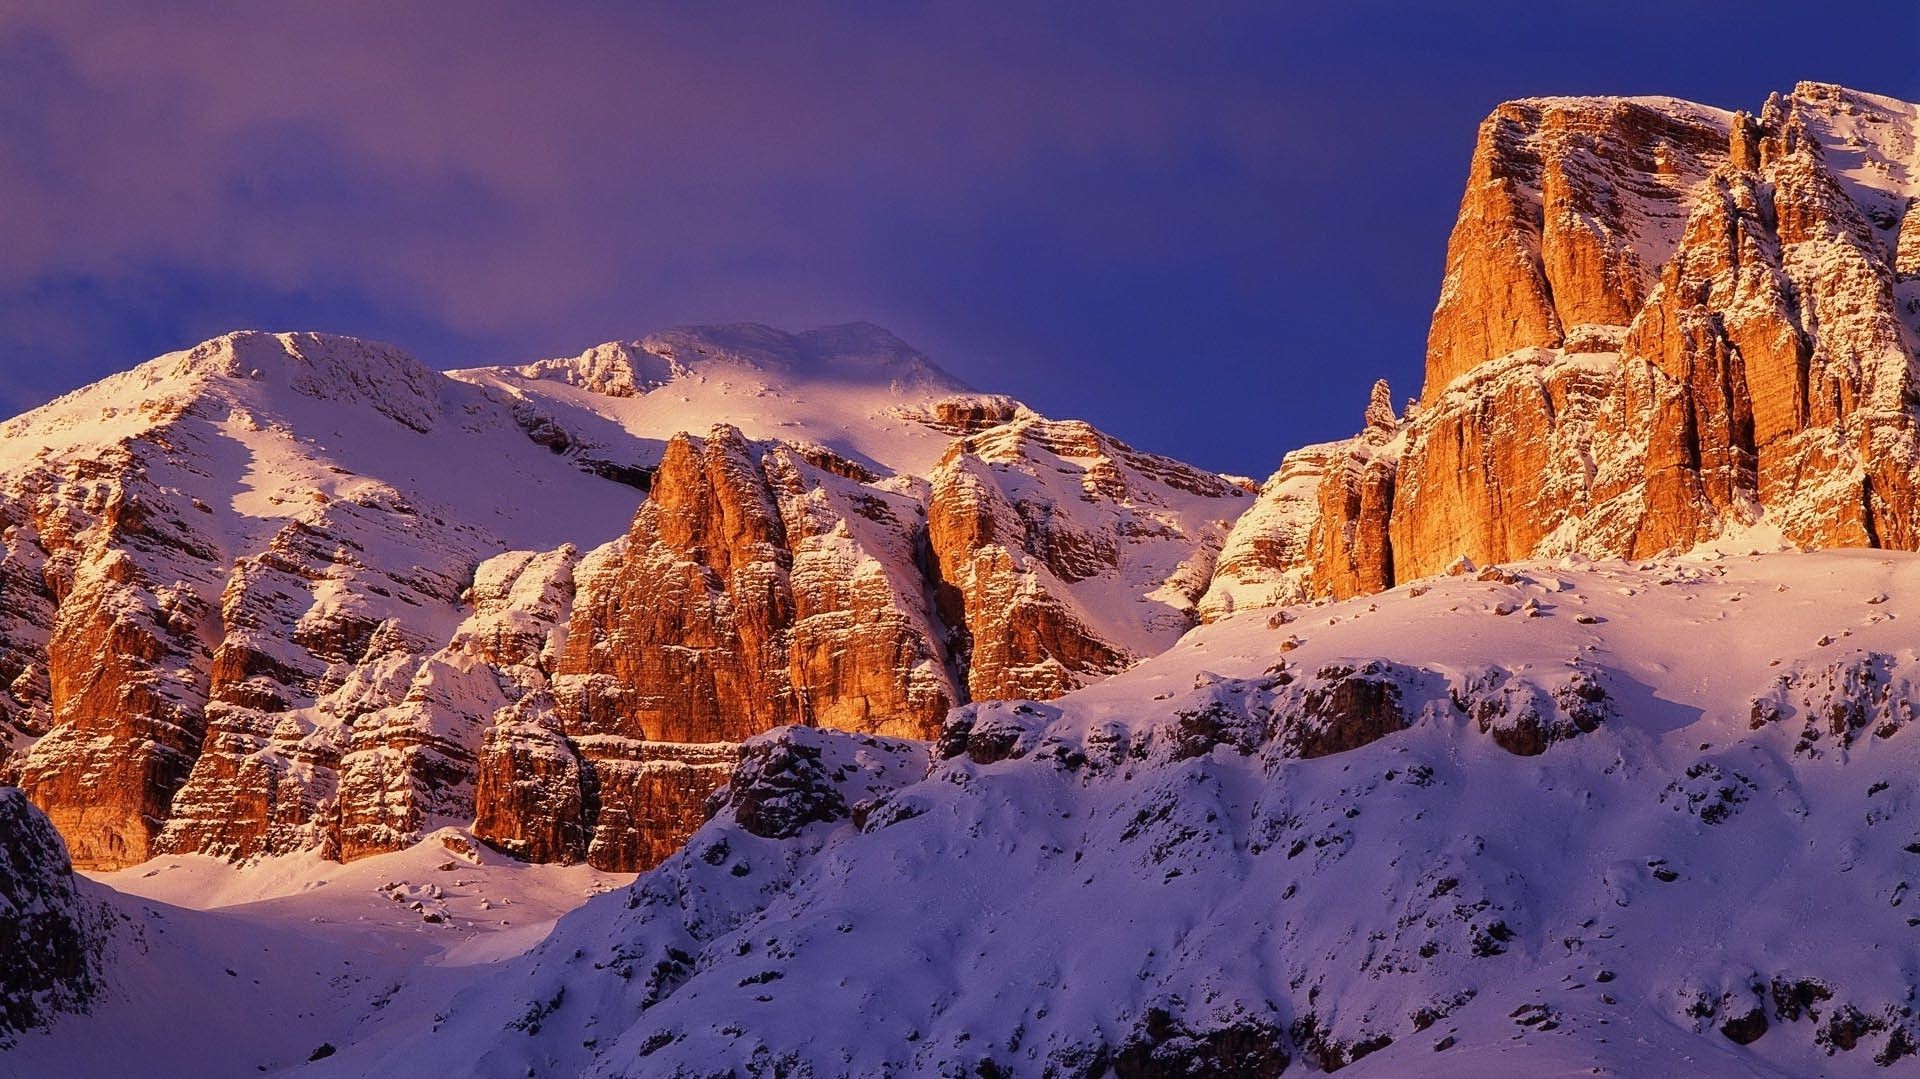 winter snow mountain travel landscape sky scenic outdoors nature sunset rock pinnacle dawn